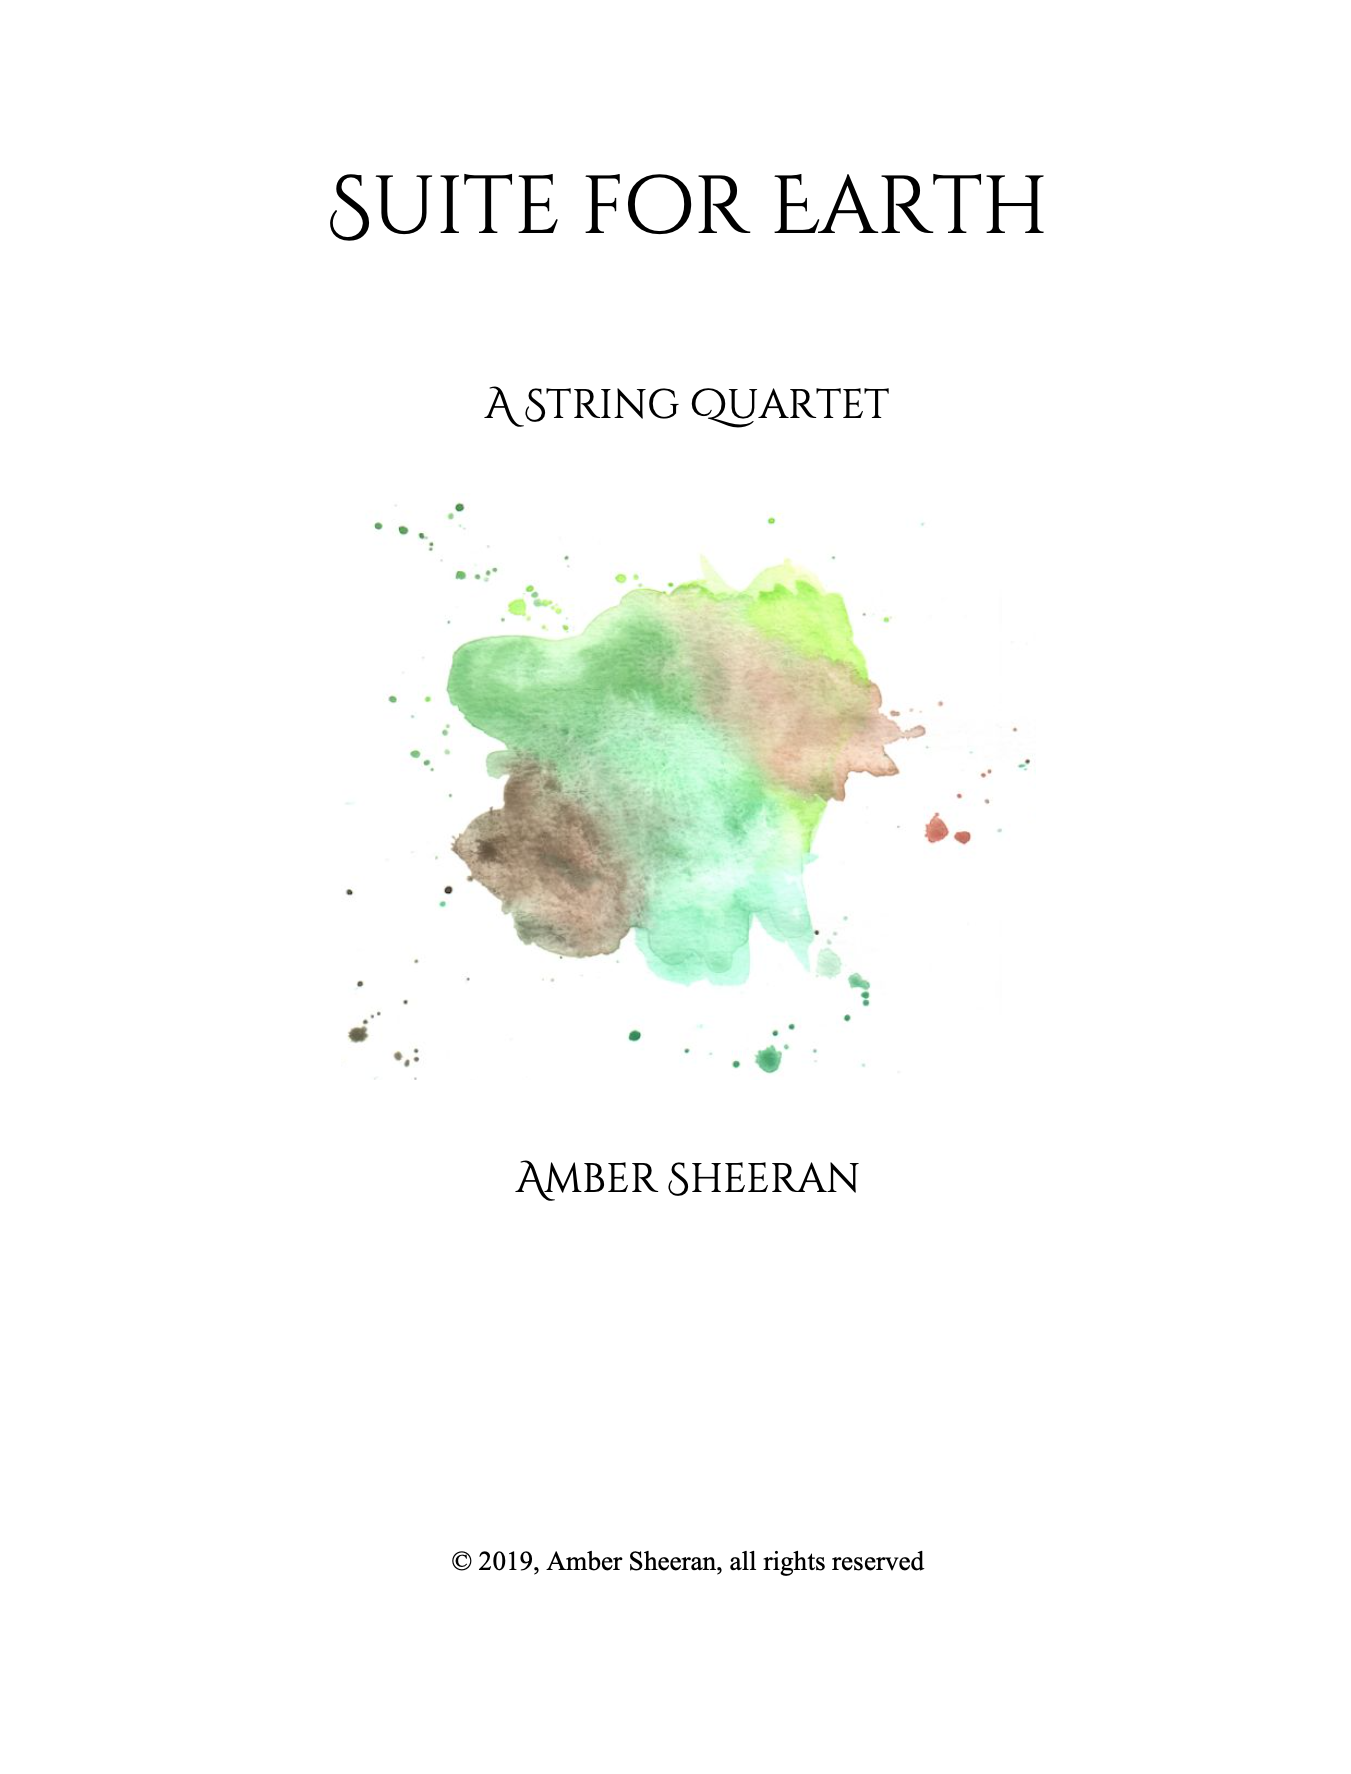 Suite For Earth by Amber Sheeran